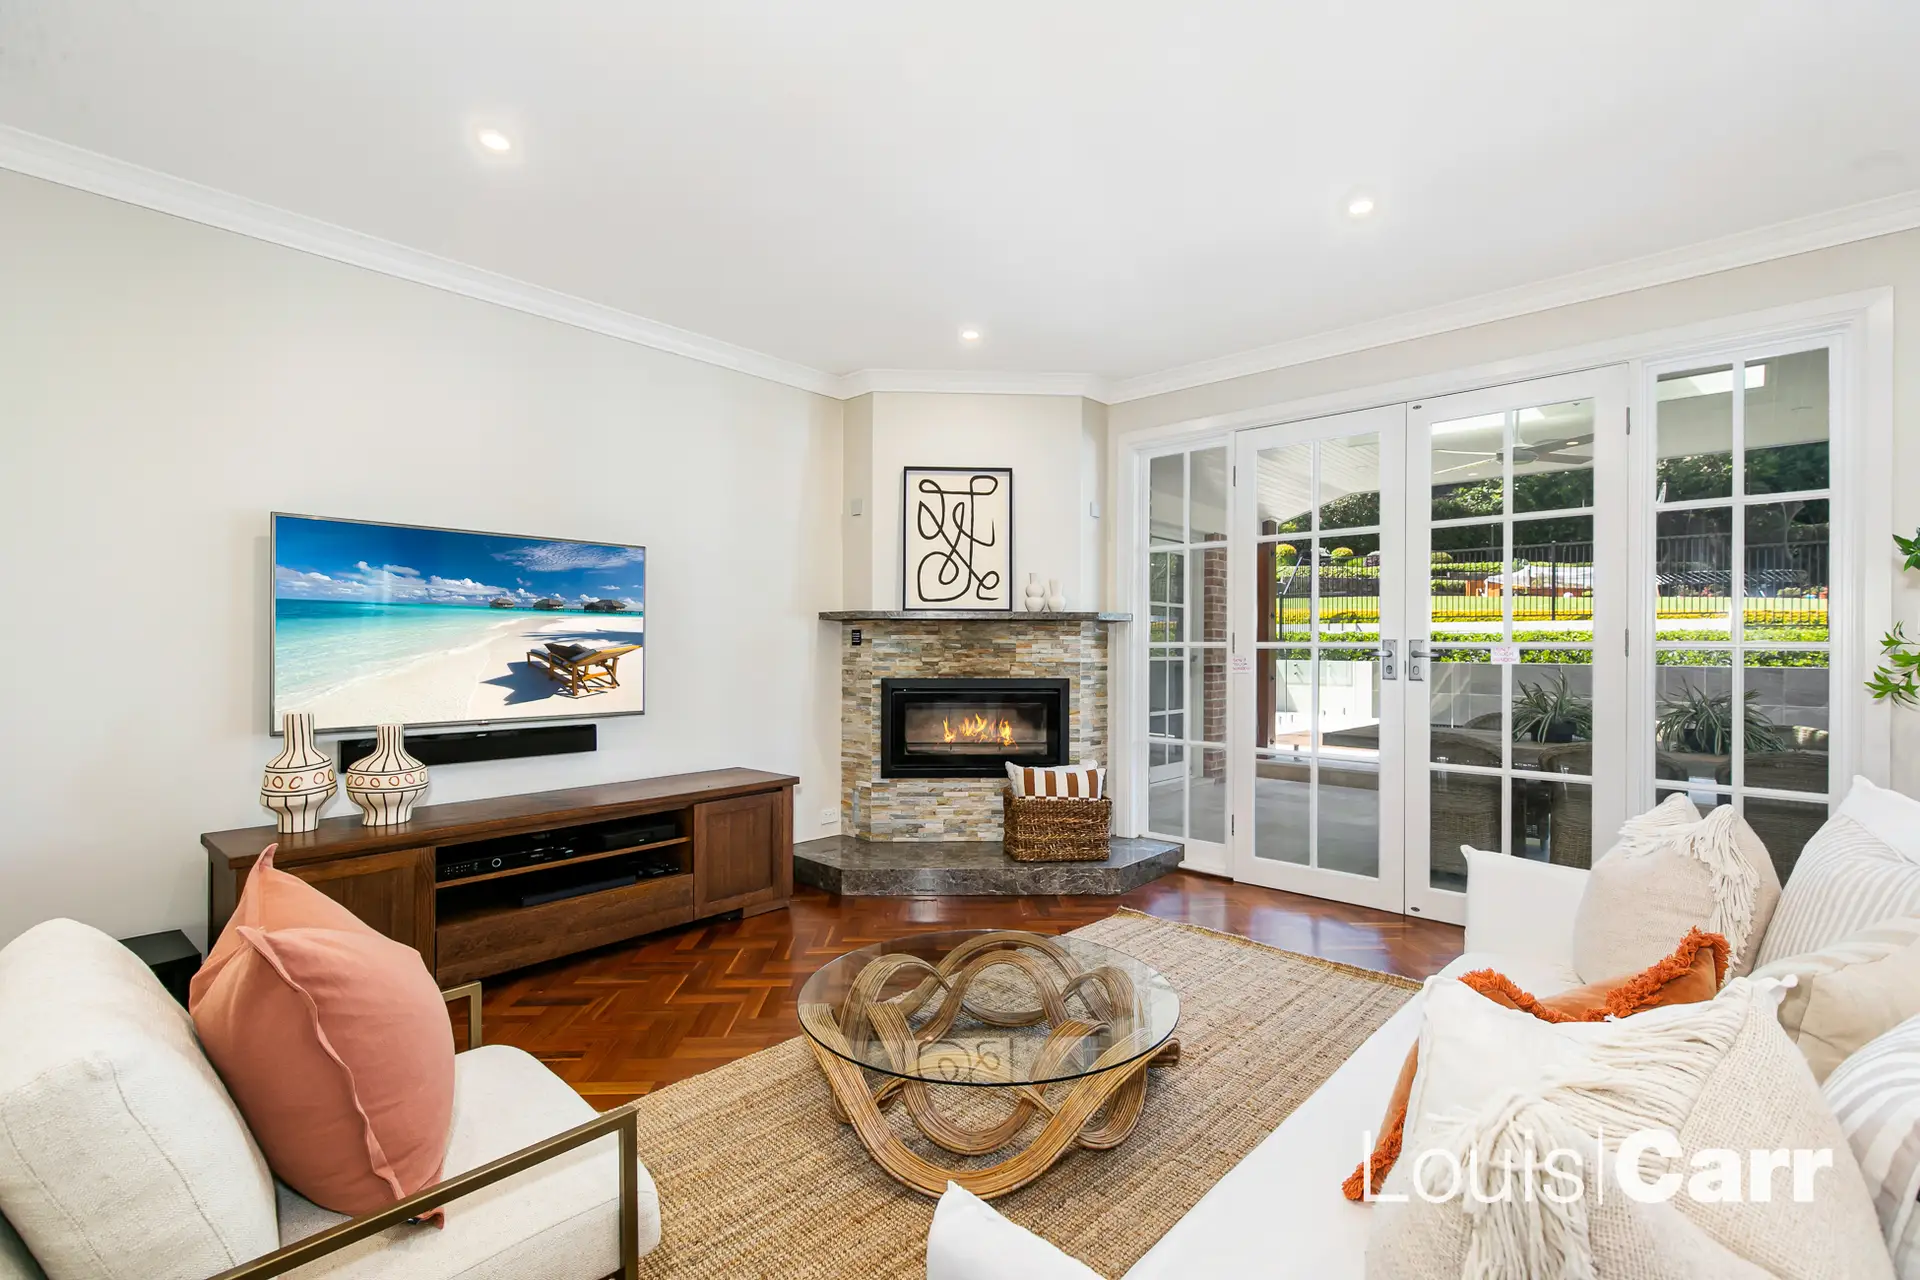 Photo #7: 23 Doris Hirst Place, West Pennant Hills - Sold by Louis Carr Real Estate